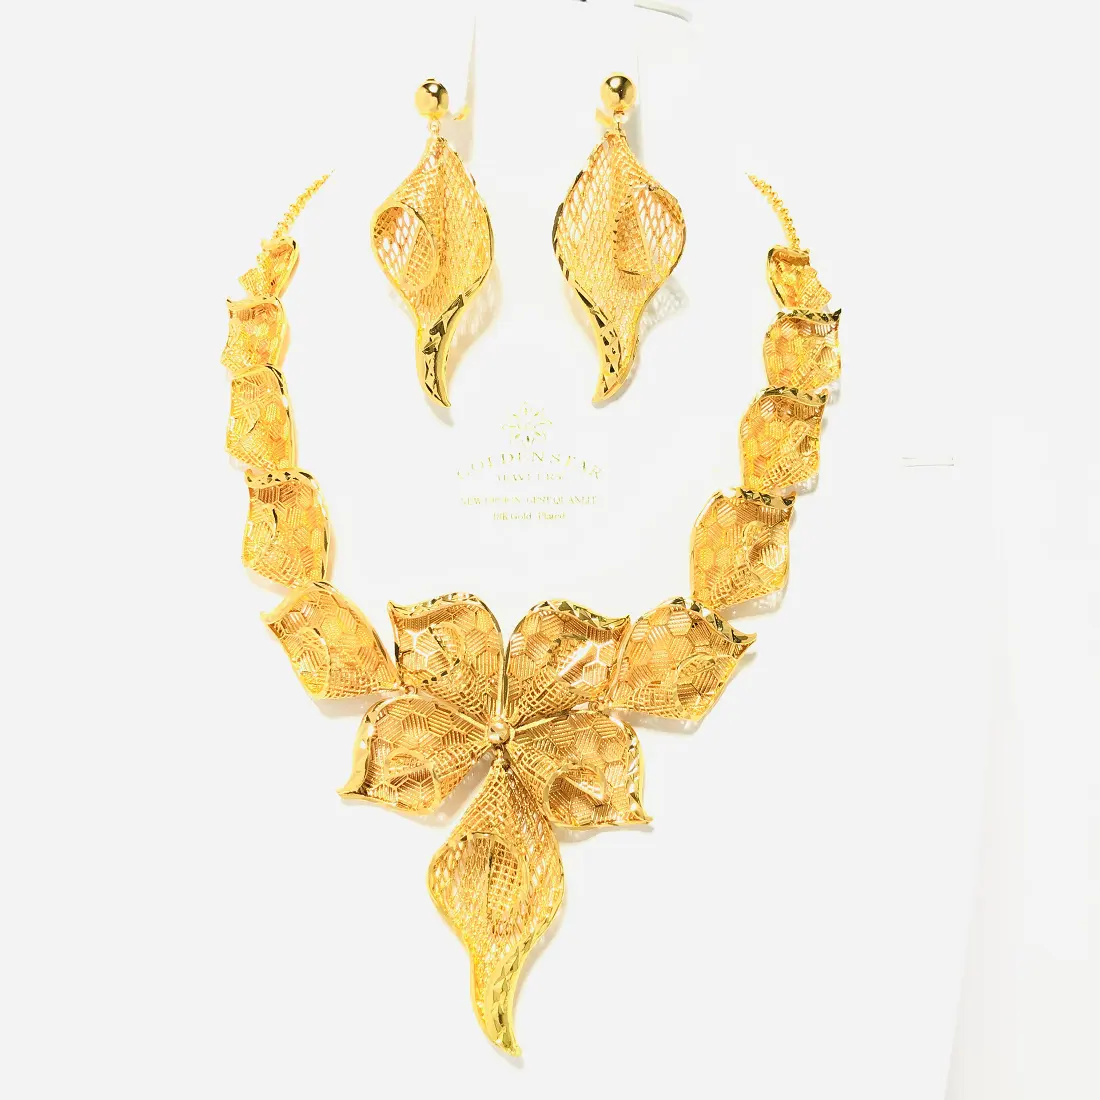 Golden Star Jewelry Wholesale 24k dubai gold jewellery necklace set For Gift